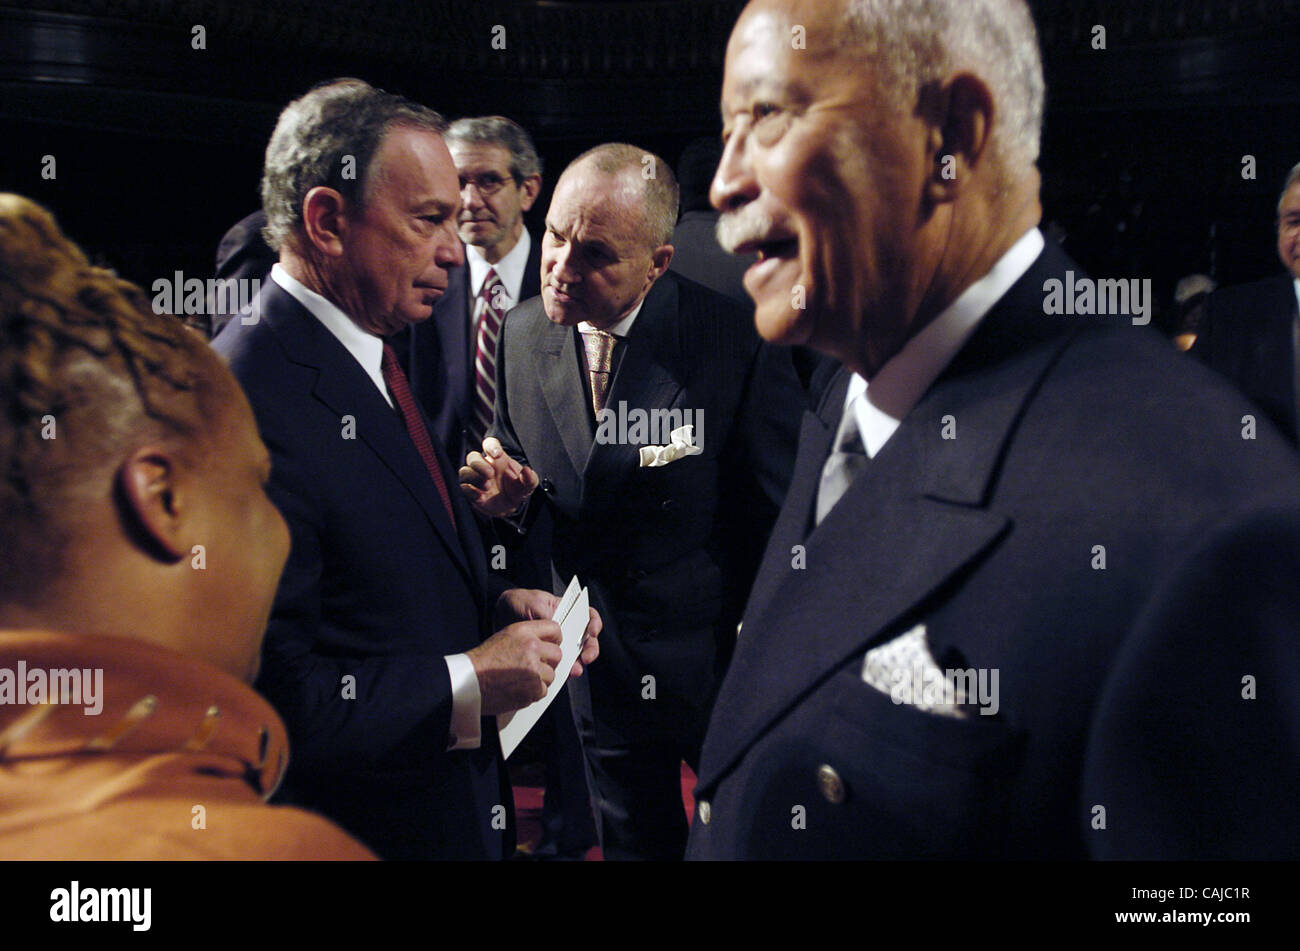 Mayor Michael Bloomberg (Center L) speaks with Police Commissioner Ray Kelly (Center R) as former Mayor David Dinkins (R) looks on. Breakfast reception to commemorate the birthday of Dr. Martin Luther King, Jr. hosted by Mayor Michael Bloomberg at City Council Chambers, City Hall. Stock Photo